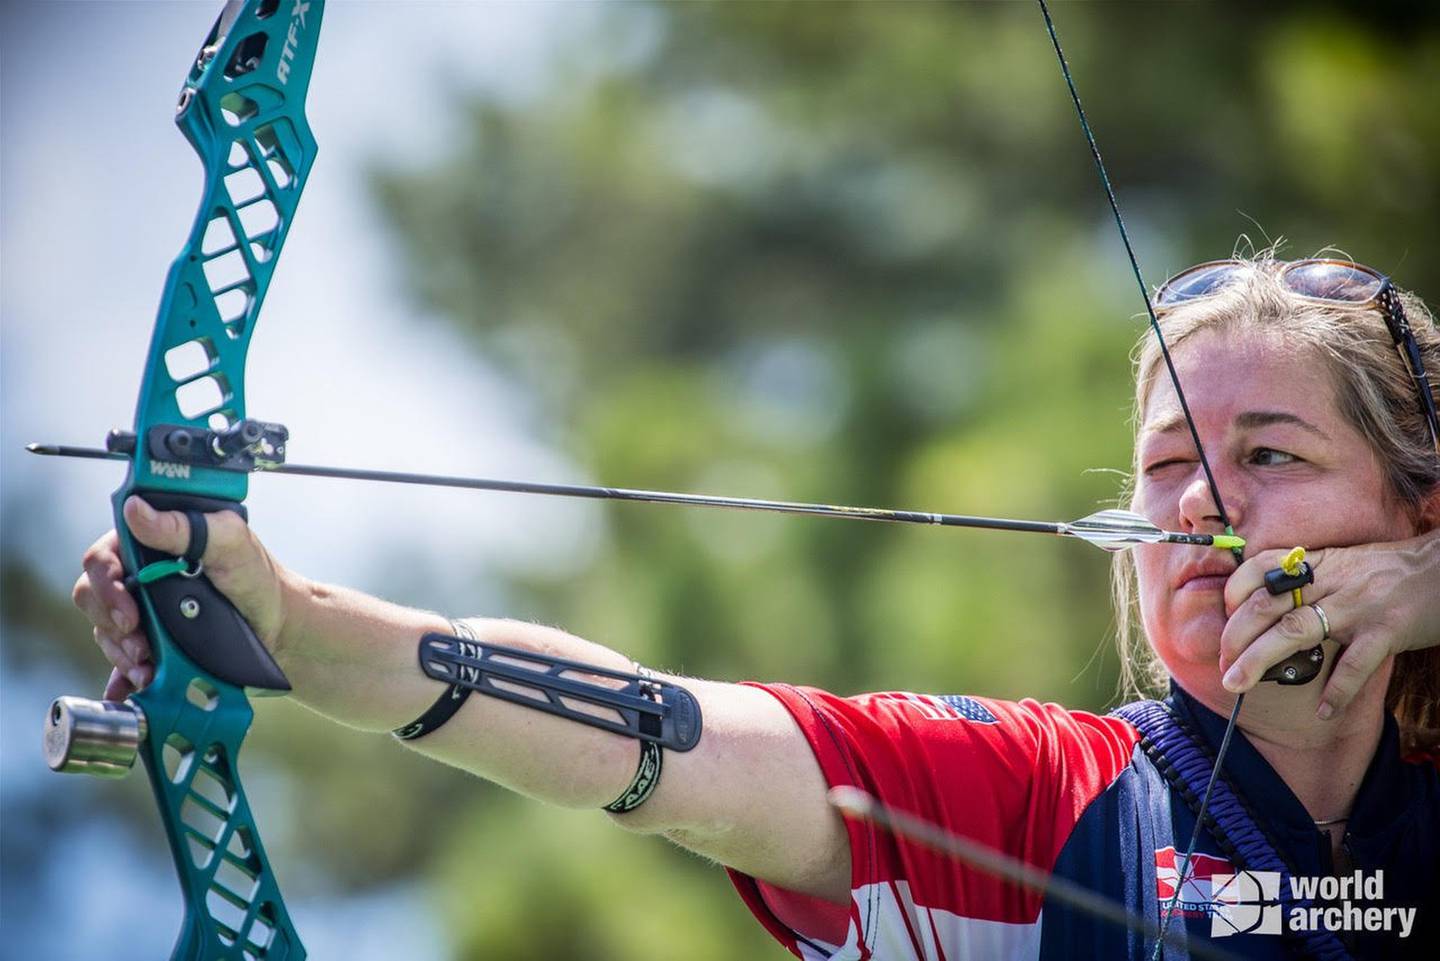 Chrissie Lyons picked up archery three years ago and has gone on to break world records and win medals in national and international competitions.